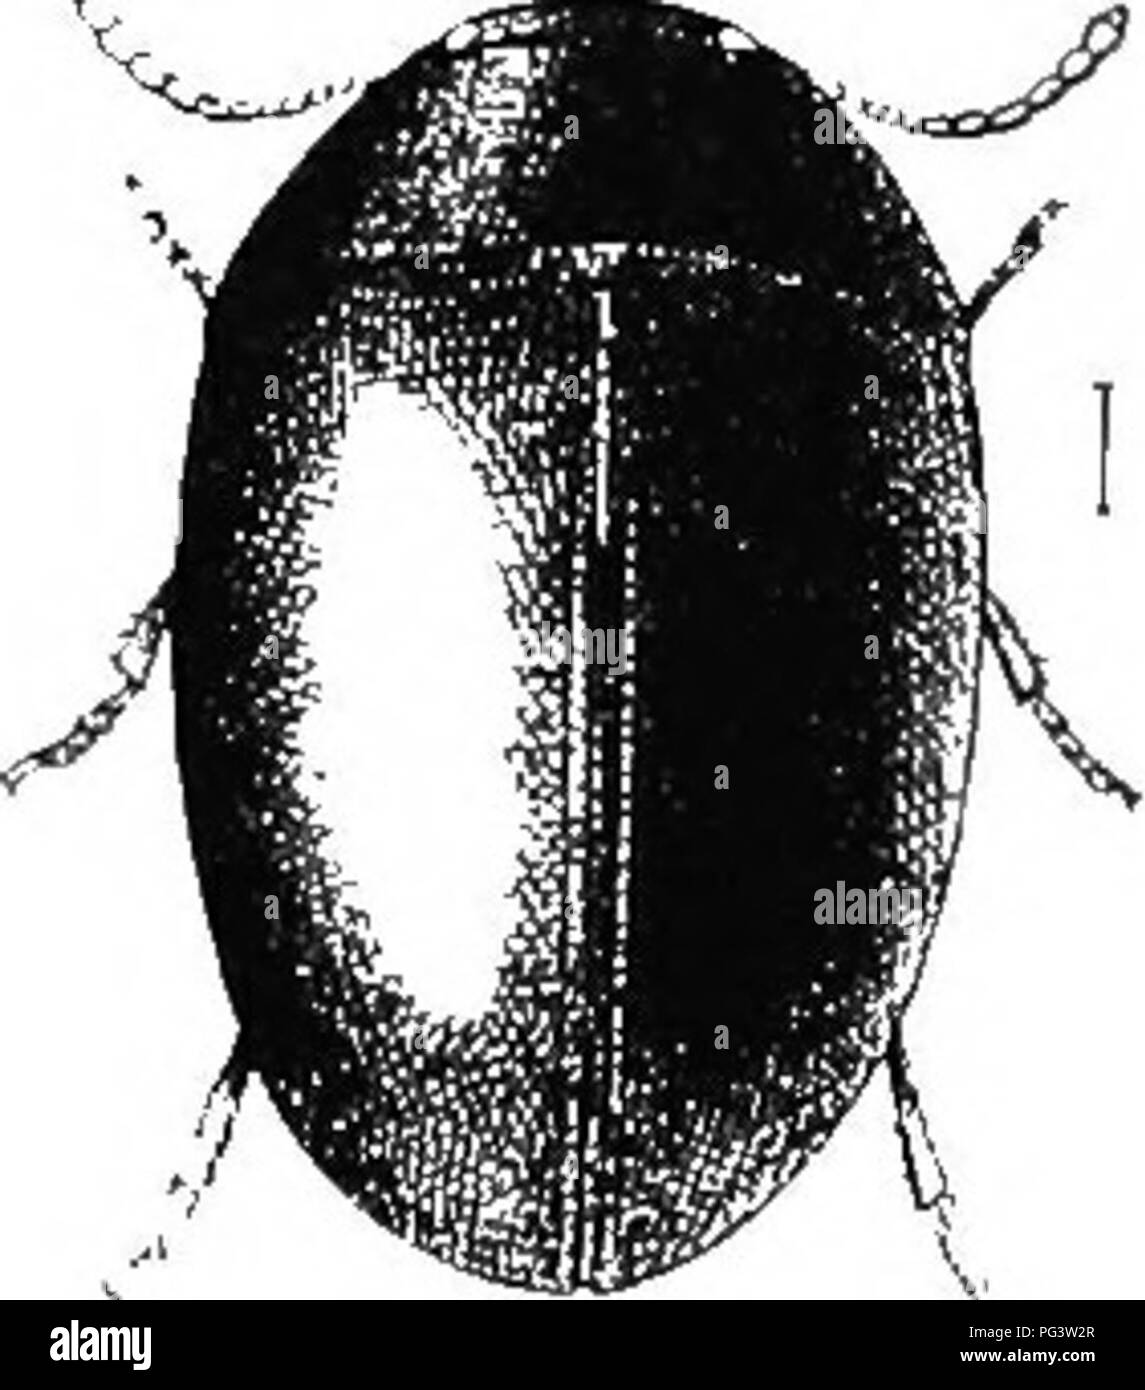 . An illustrated descriptive catalogue of the coleoptera or beetles (exclusive of the Rhynchophora) known to occur in Indiana : with bibliography and descriptions of new species . Beetles. •&quot;'OO FAMILY XIV.—PHALACRIDiE. 959 (9SS1). AcYLOMUs ekgoti Casey, Ann. N. Y. Acad. Sci., V. 1S90, 119. Strongly convex, almost evenly elliptical, not at all narrowed behind the middle. Above black or dark chestnut-brown, strongly shining; beneath pale brownish-j^ellow. Elytra with one discal stria, this obsolete on basal third, and with rows of punctures which, near the suture, are very minute and feebl Stock Photo